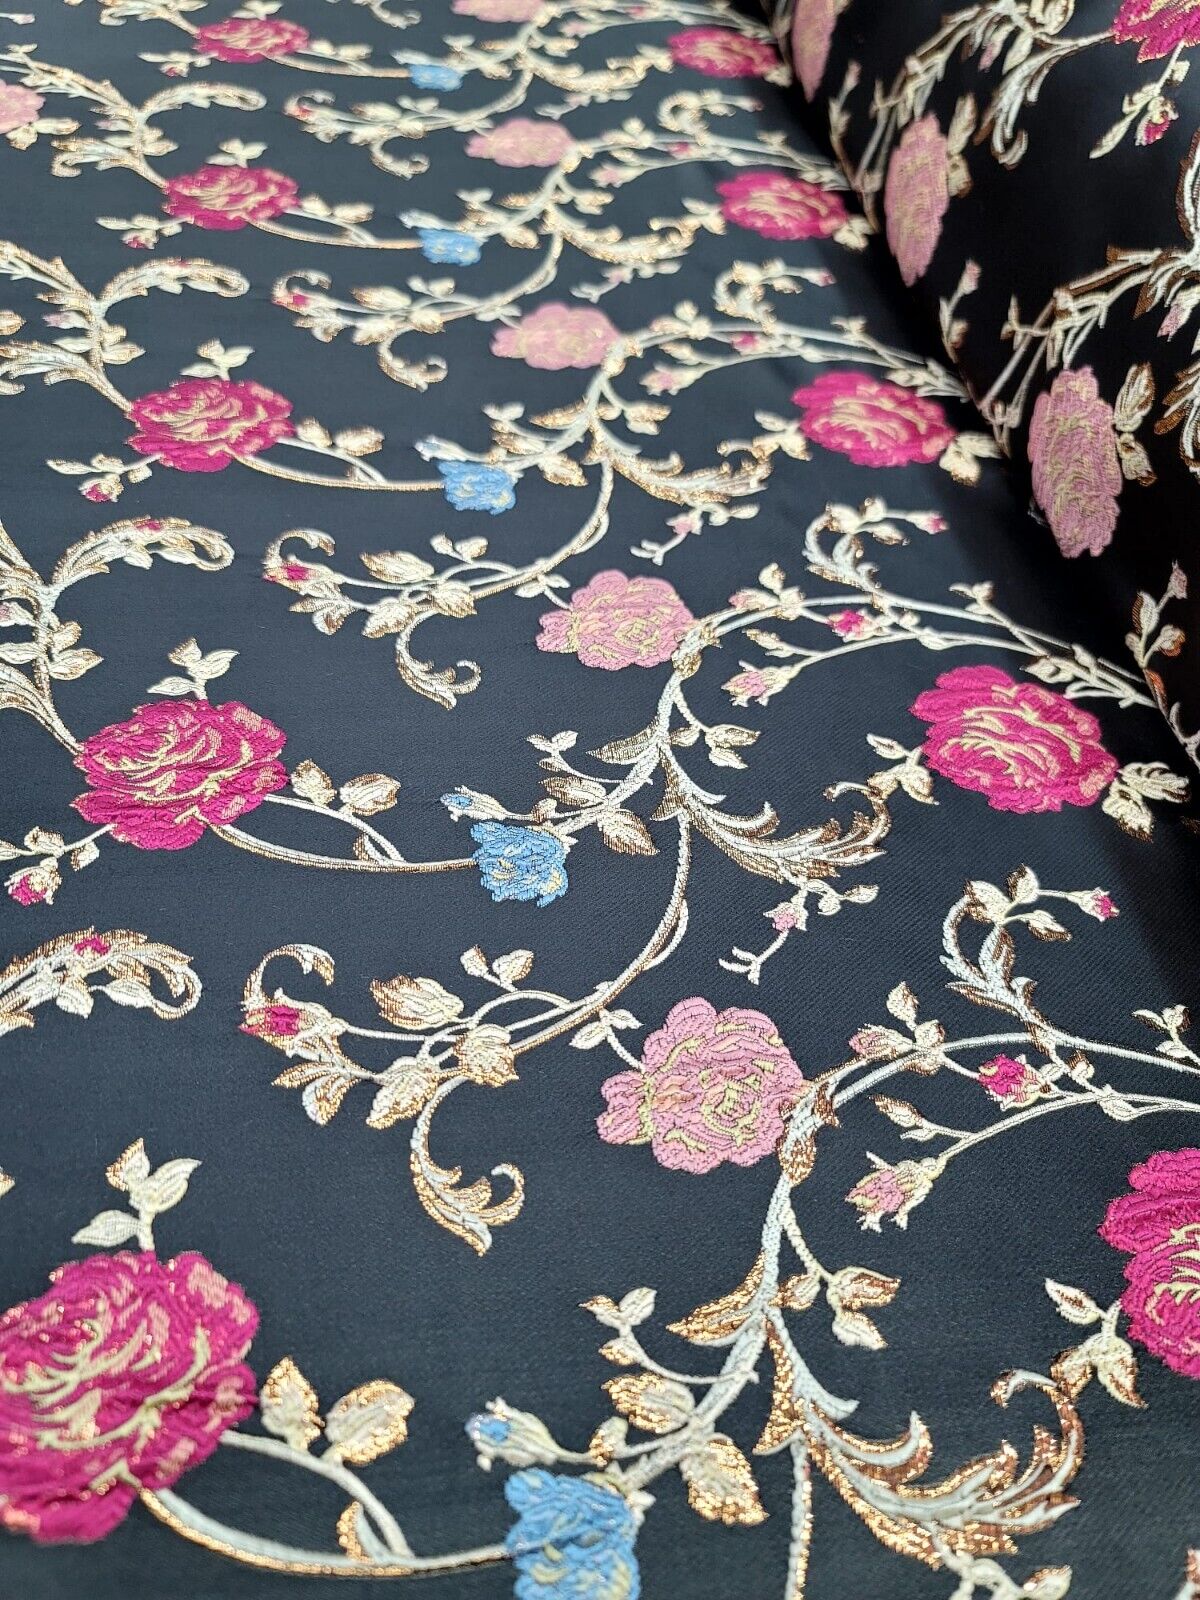 Black Brocade Fabric Sold by The Yard Floral Pink Gold Blue For Dress Upholstery